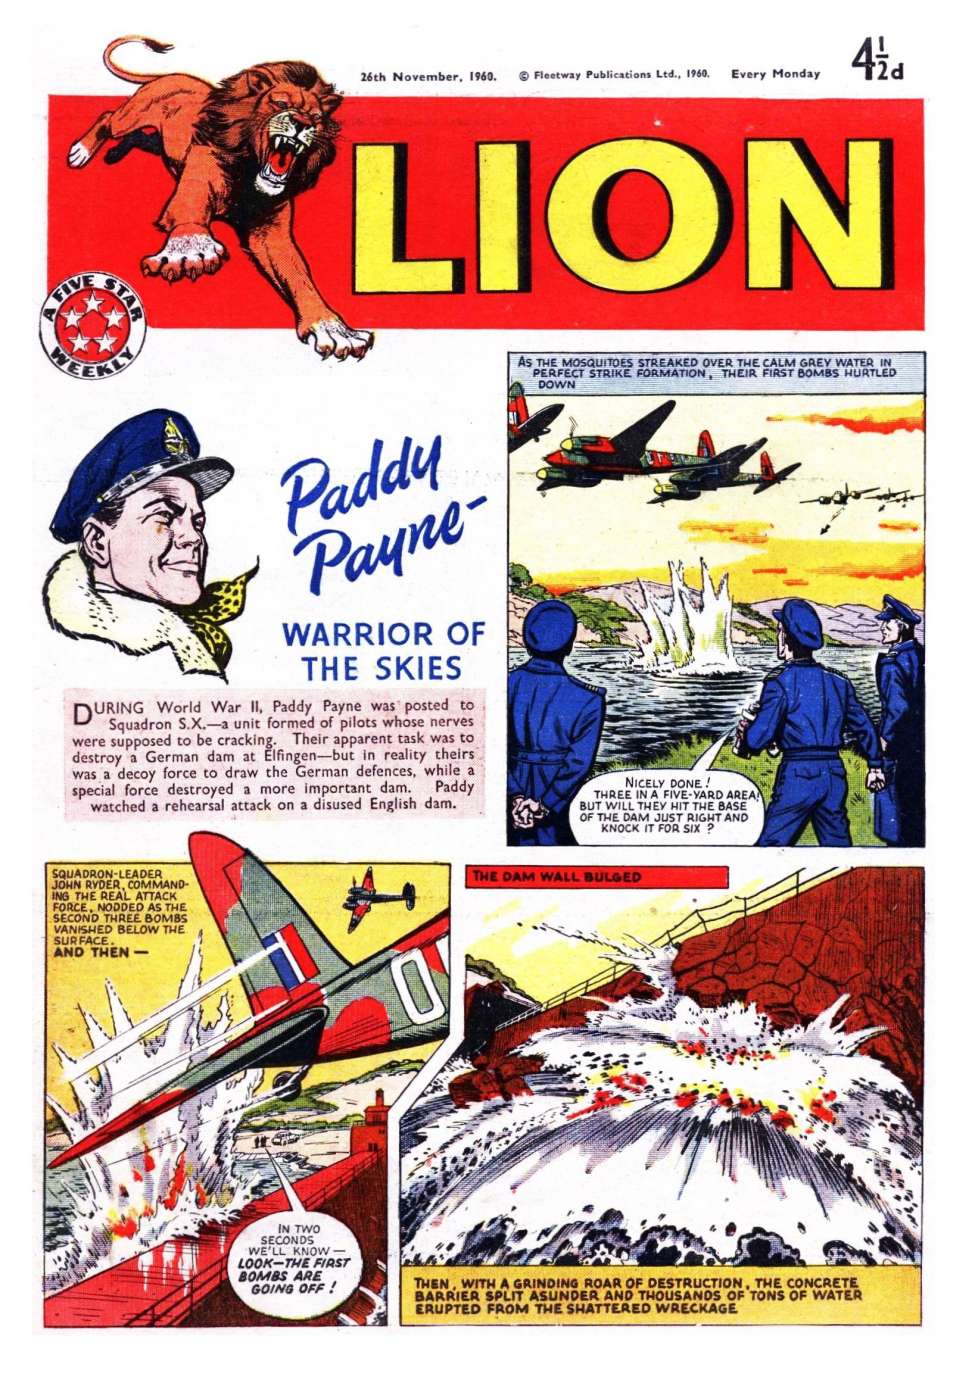 Book Cover For Lion 451